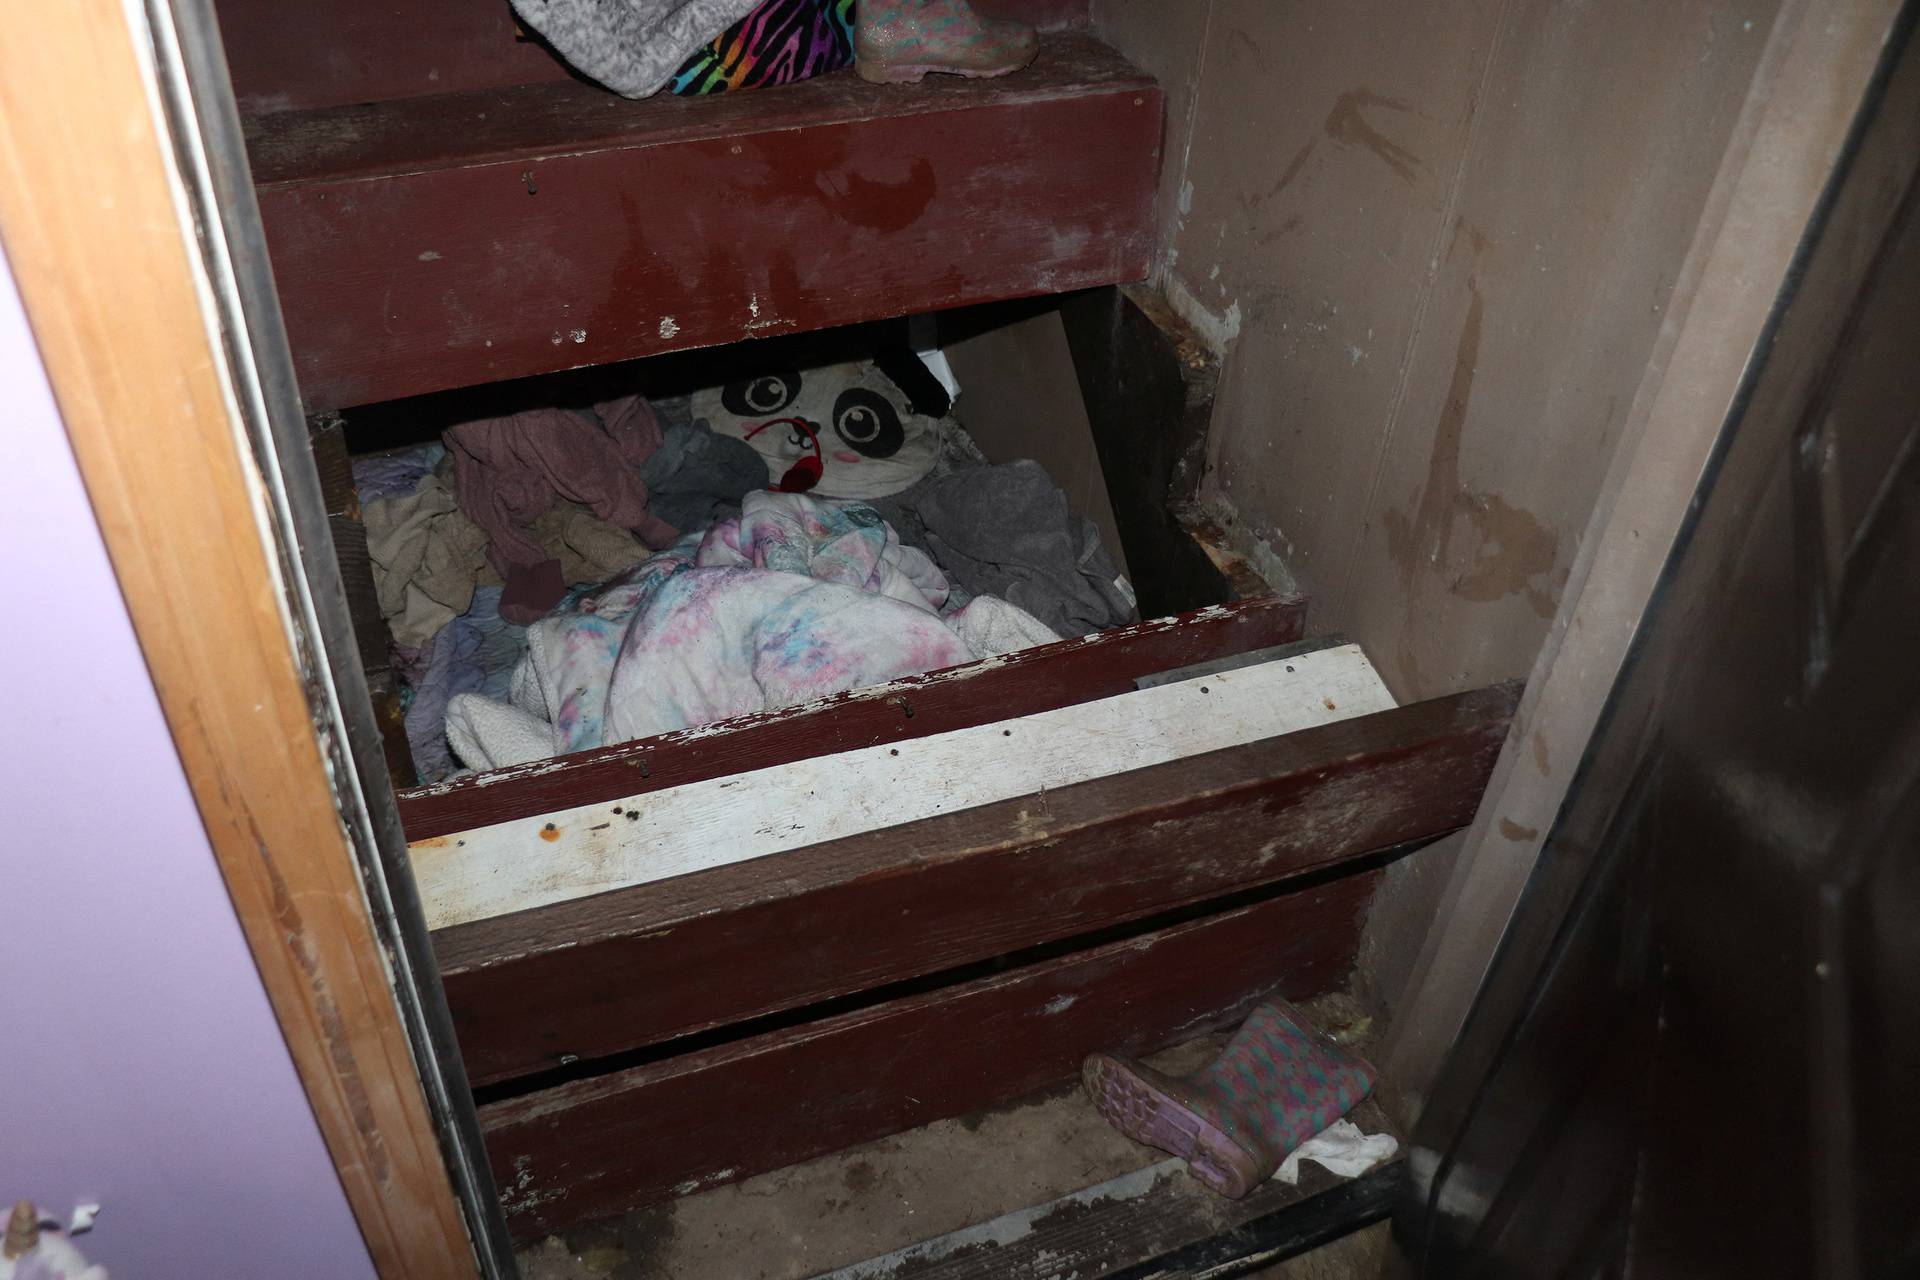 A makeshift room underneath a staircase, where 6-year-old Paislee Shultis was found by police in Saugerties